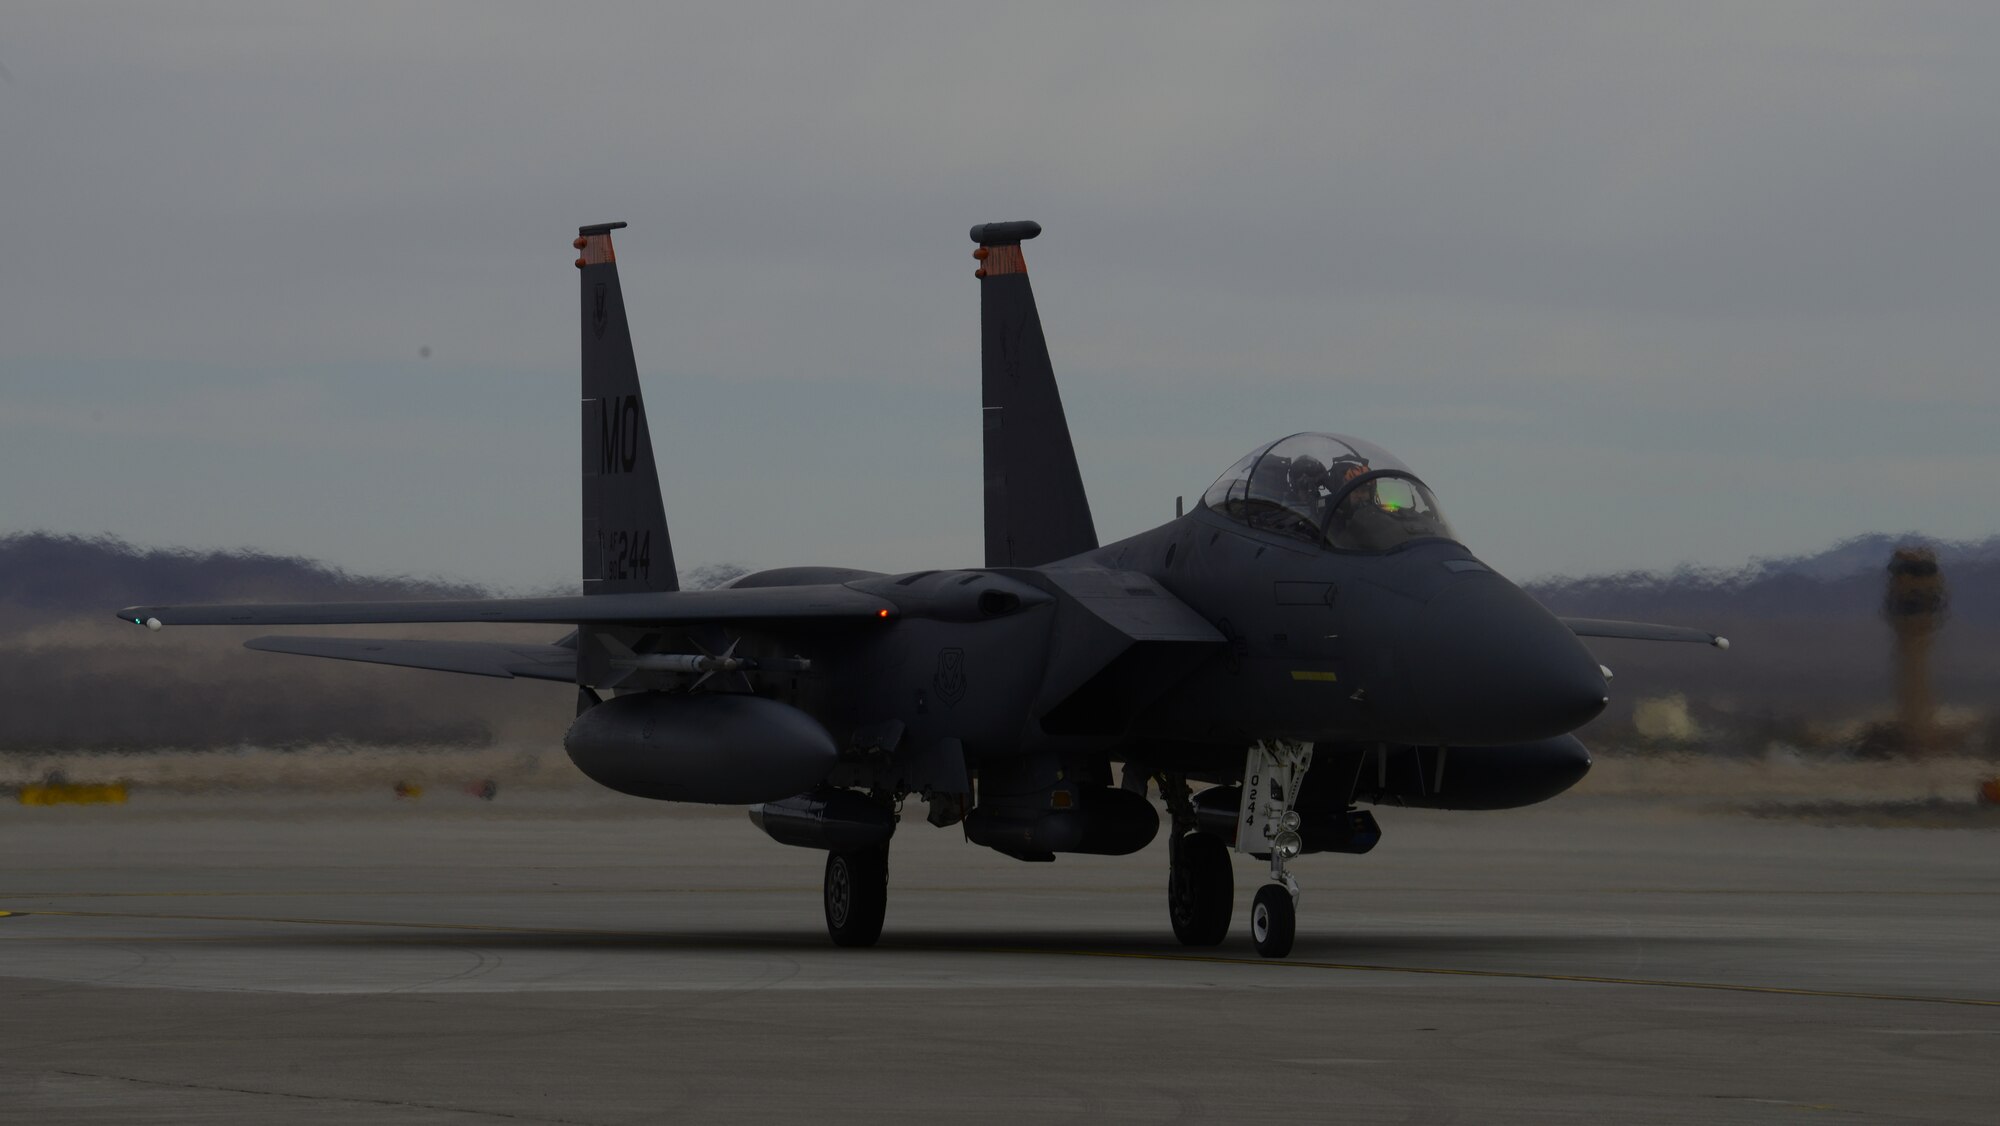 An F-15E Strike Eagle from Mountain Home Air Force Base, Idaho, taxis on the flightline Jan. 23, 2013, at Nellis Air Force Base, Nev. More than eight Bold Tiger aircraft arrived today and will be participating in Red Flag 14-1 throughout the next three weeks. (U.S. Air Force photo by Senior Airman Benjamin Sutton/Released)